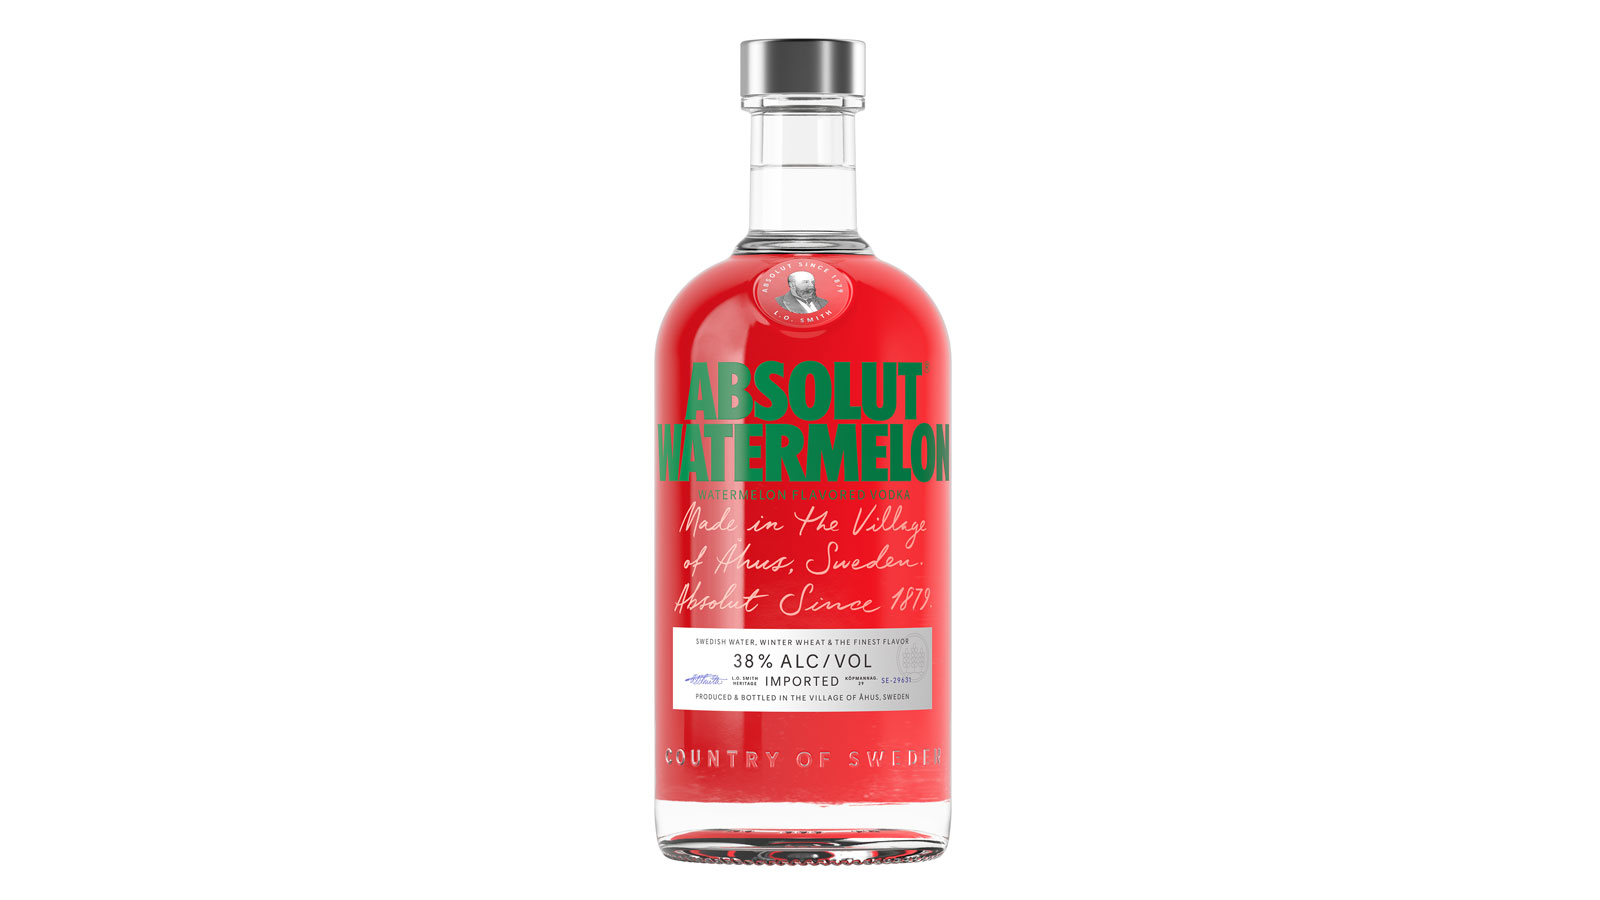 Introducing Absolut Watermelon – a new, naturally refreshing flavour from Absolut